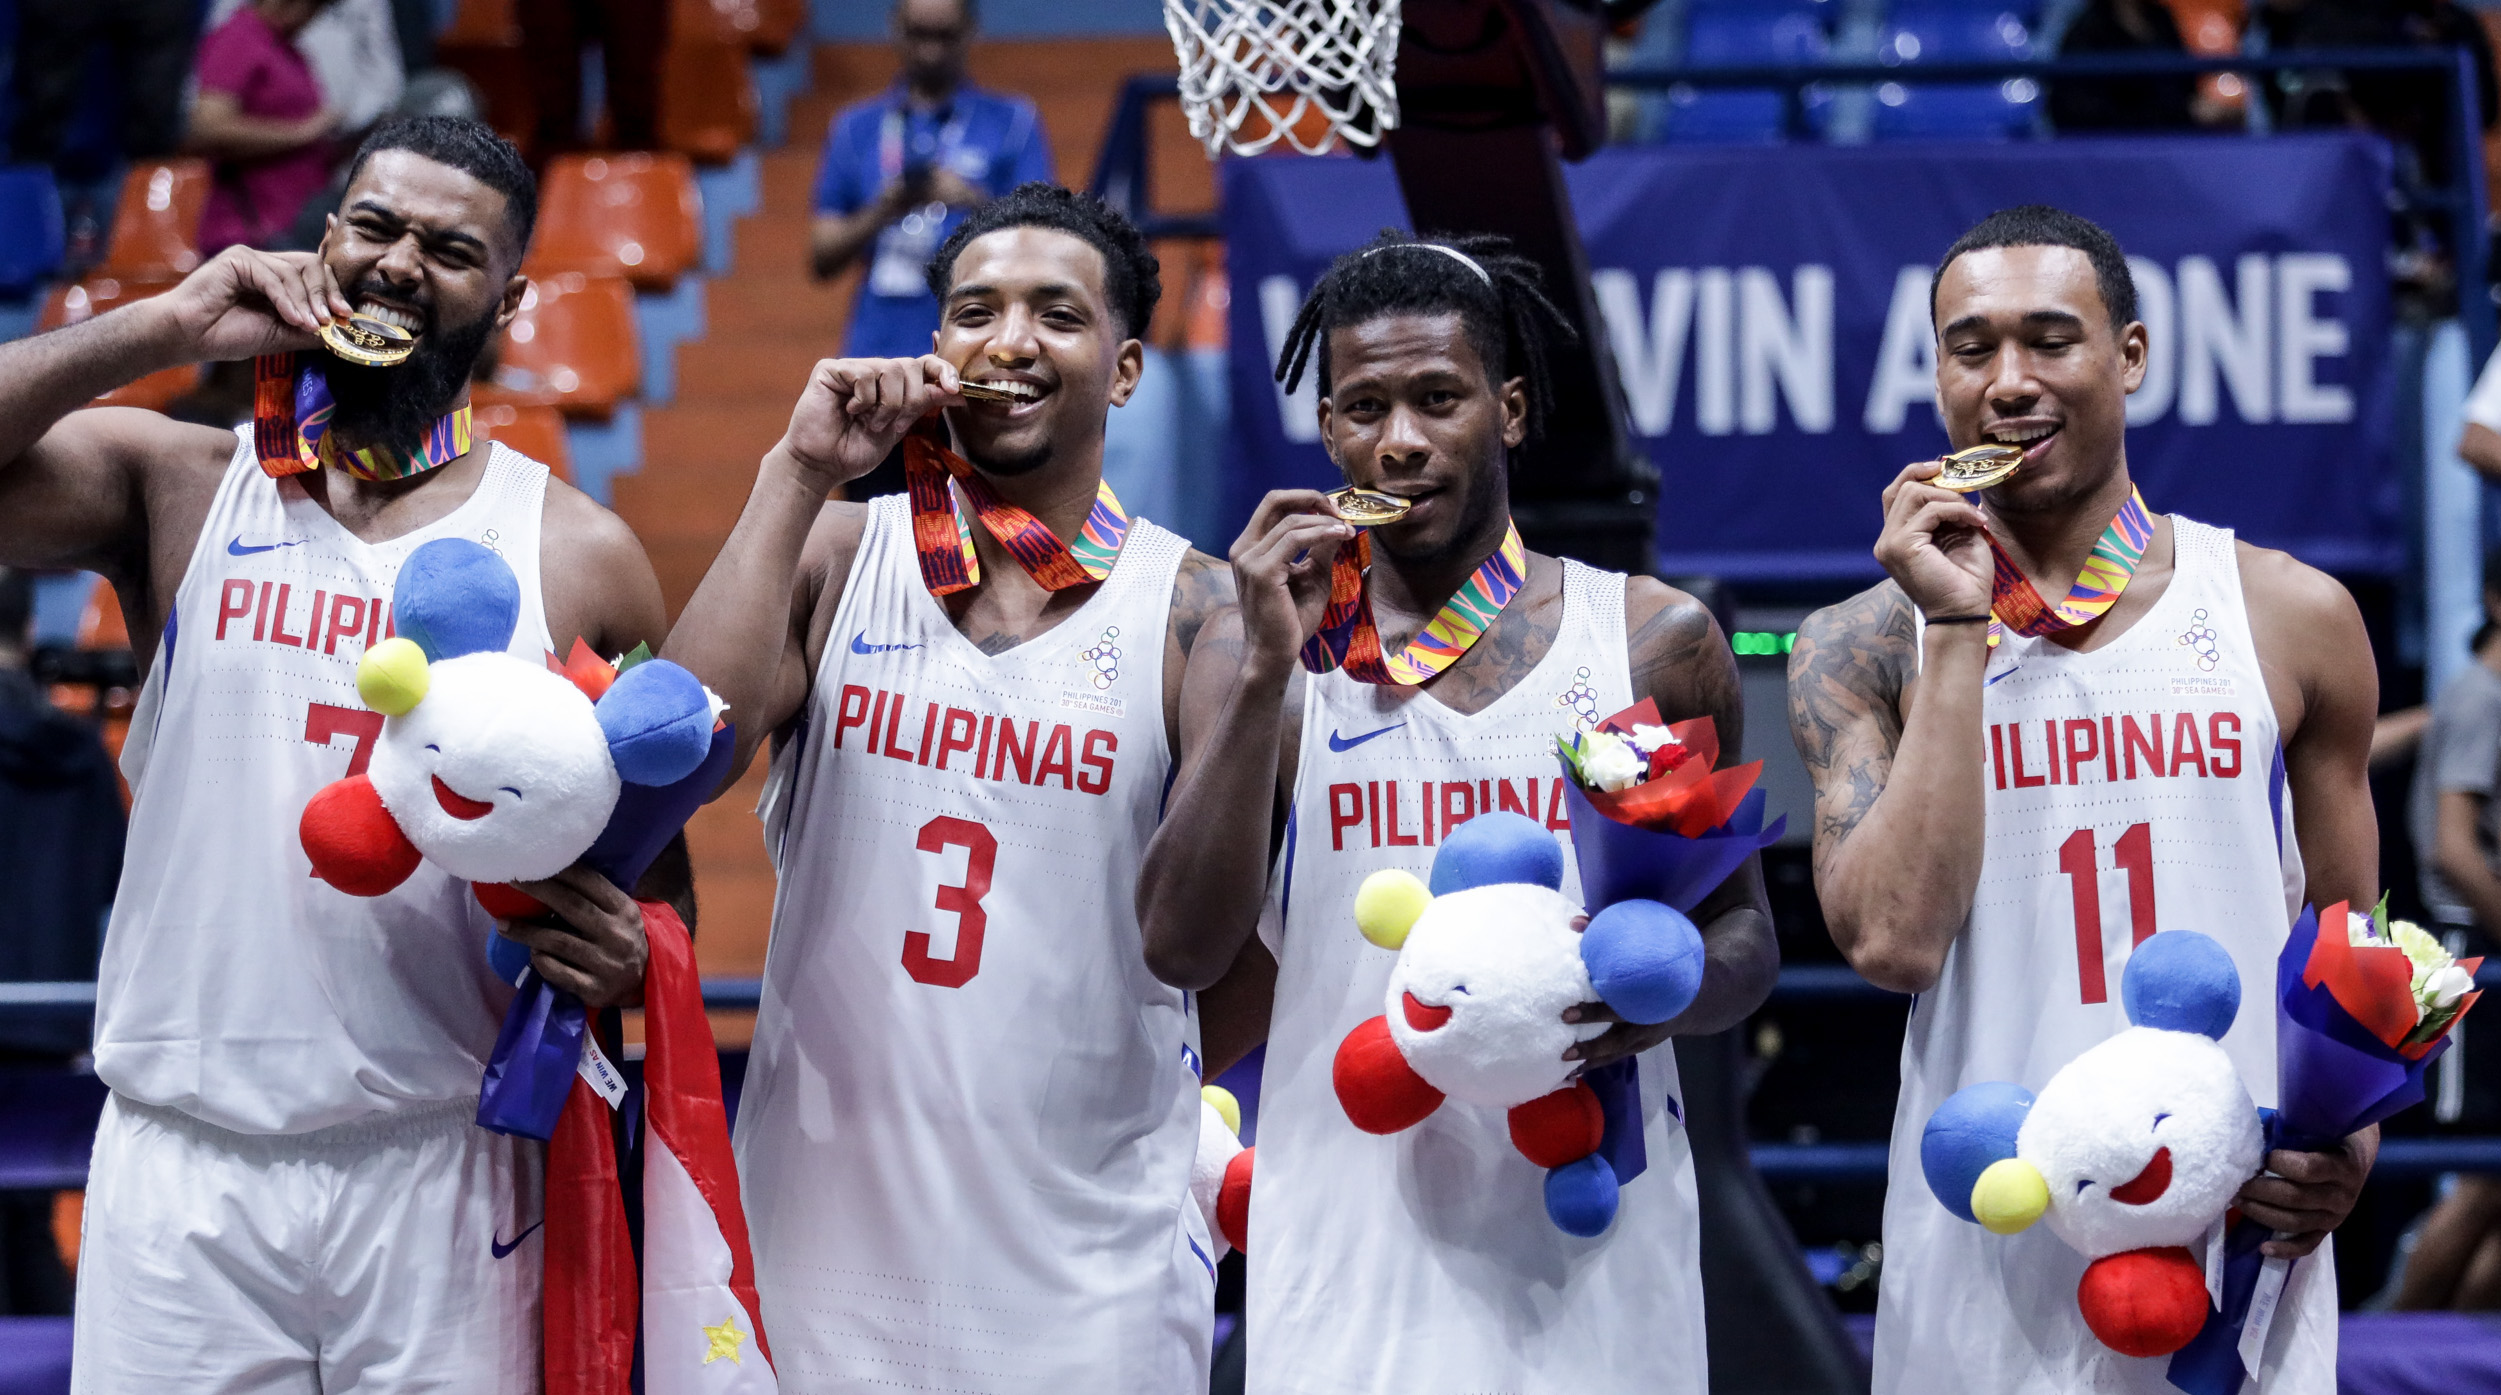 Philippines men's basketball team clinches gold at Asian Games